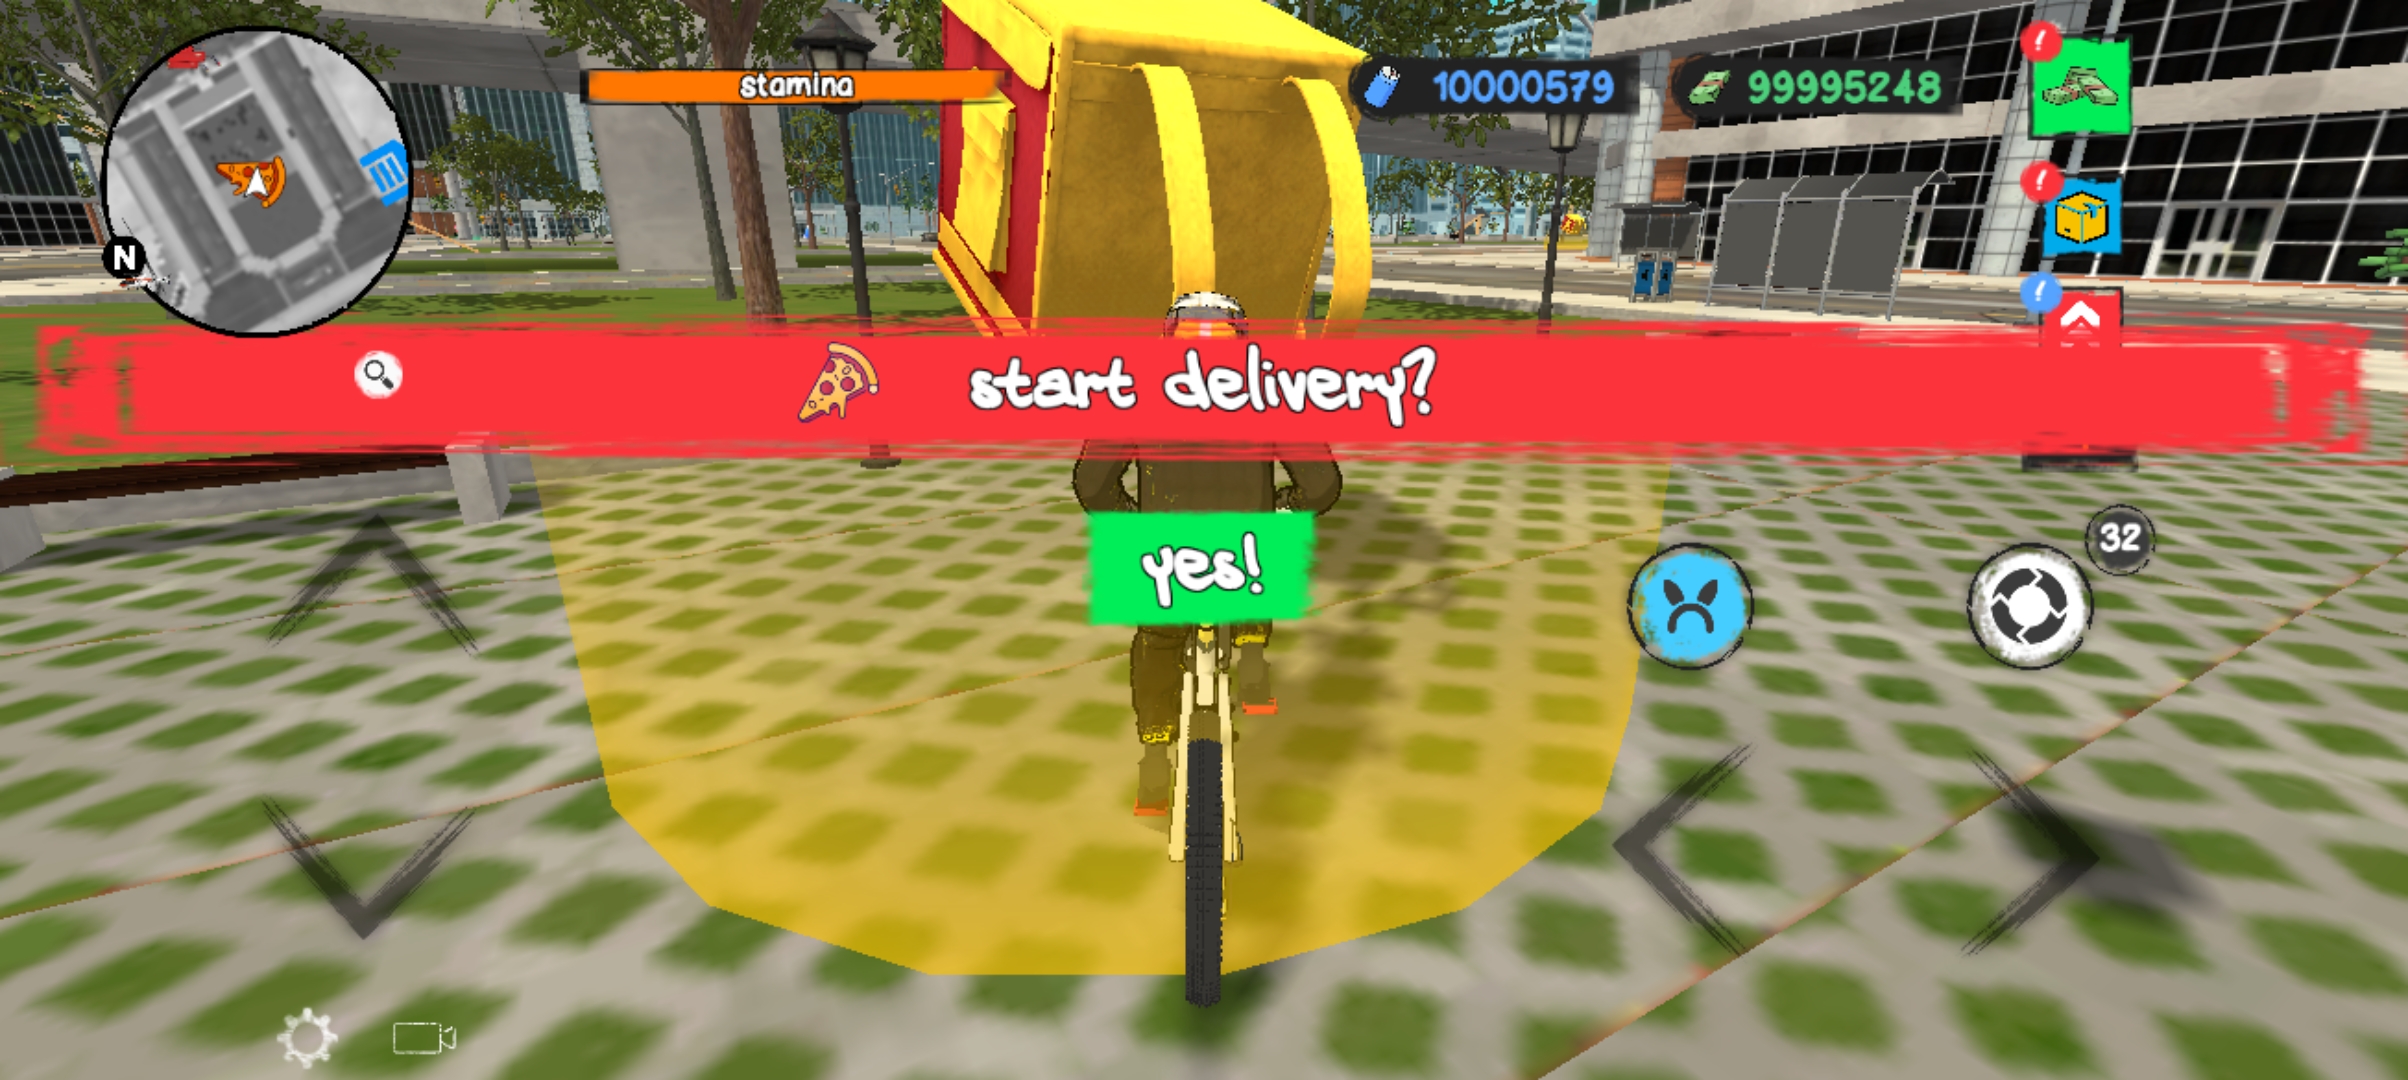 °(Bicycle Pizza Delivery)v0.74 °